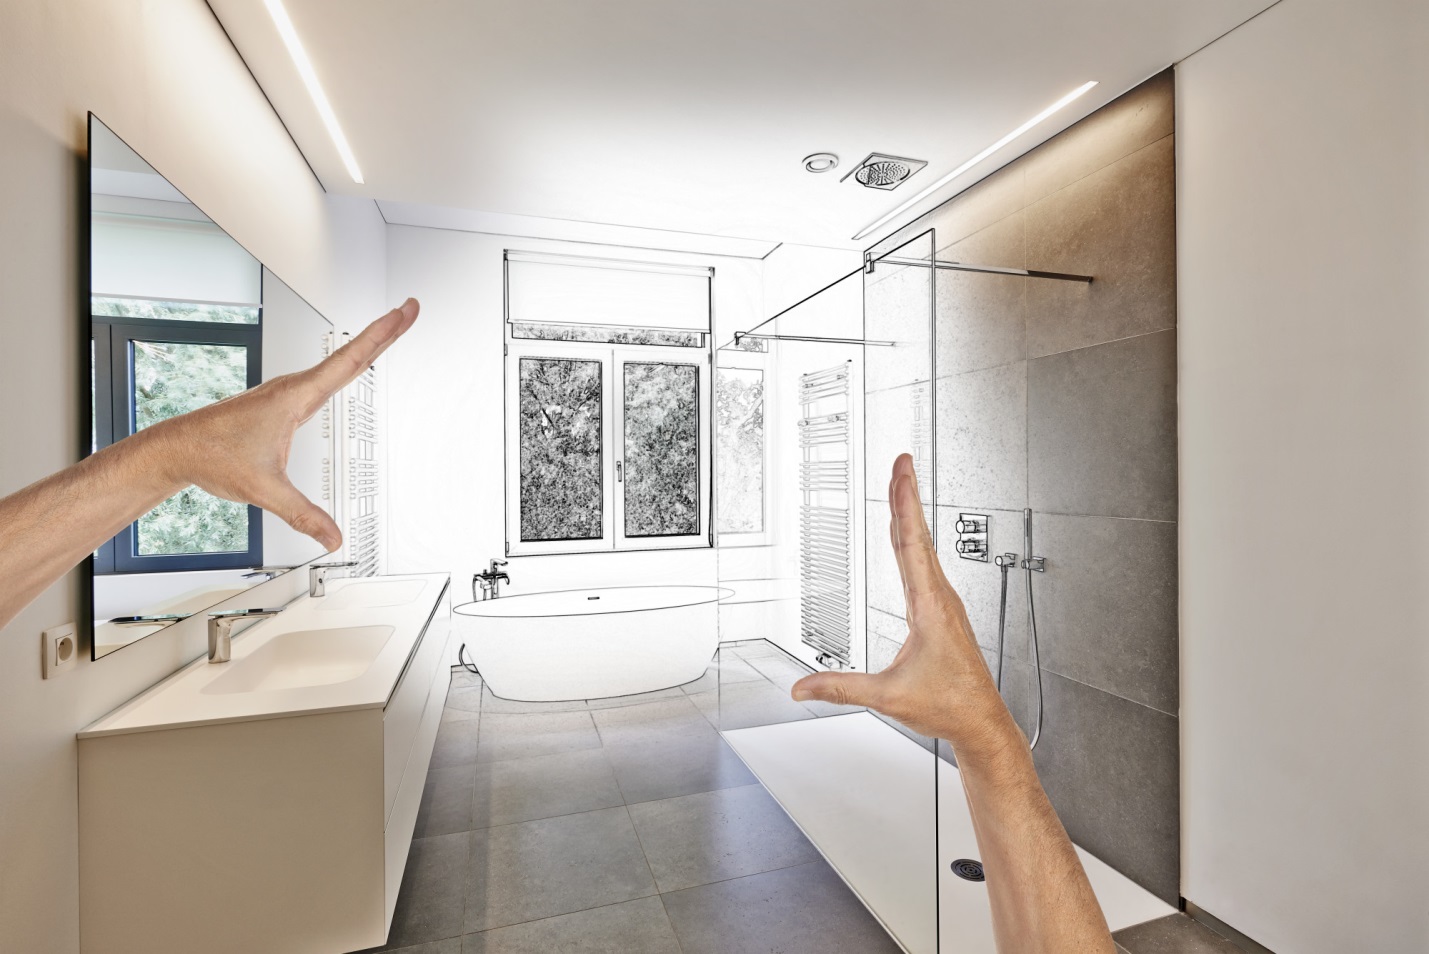 A man is pointing to a bathroom with a shower, offering bathroom ideas.